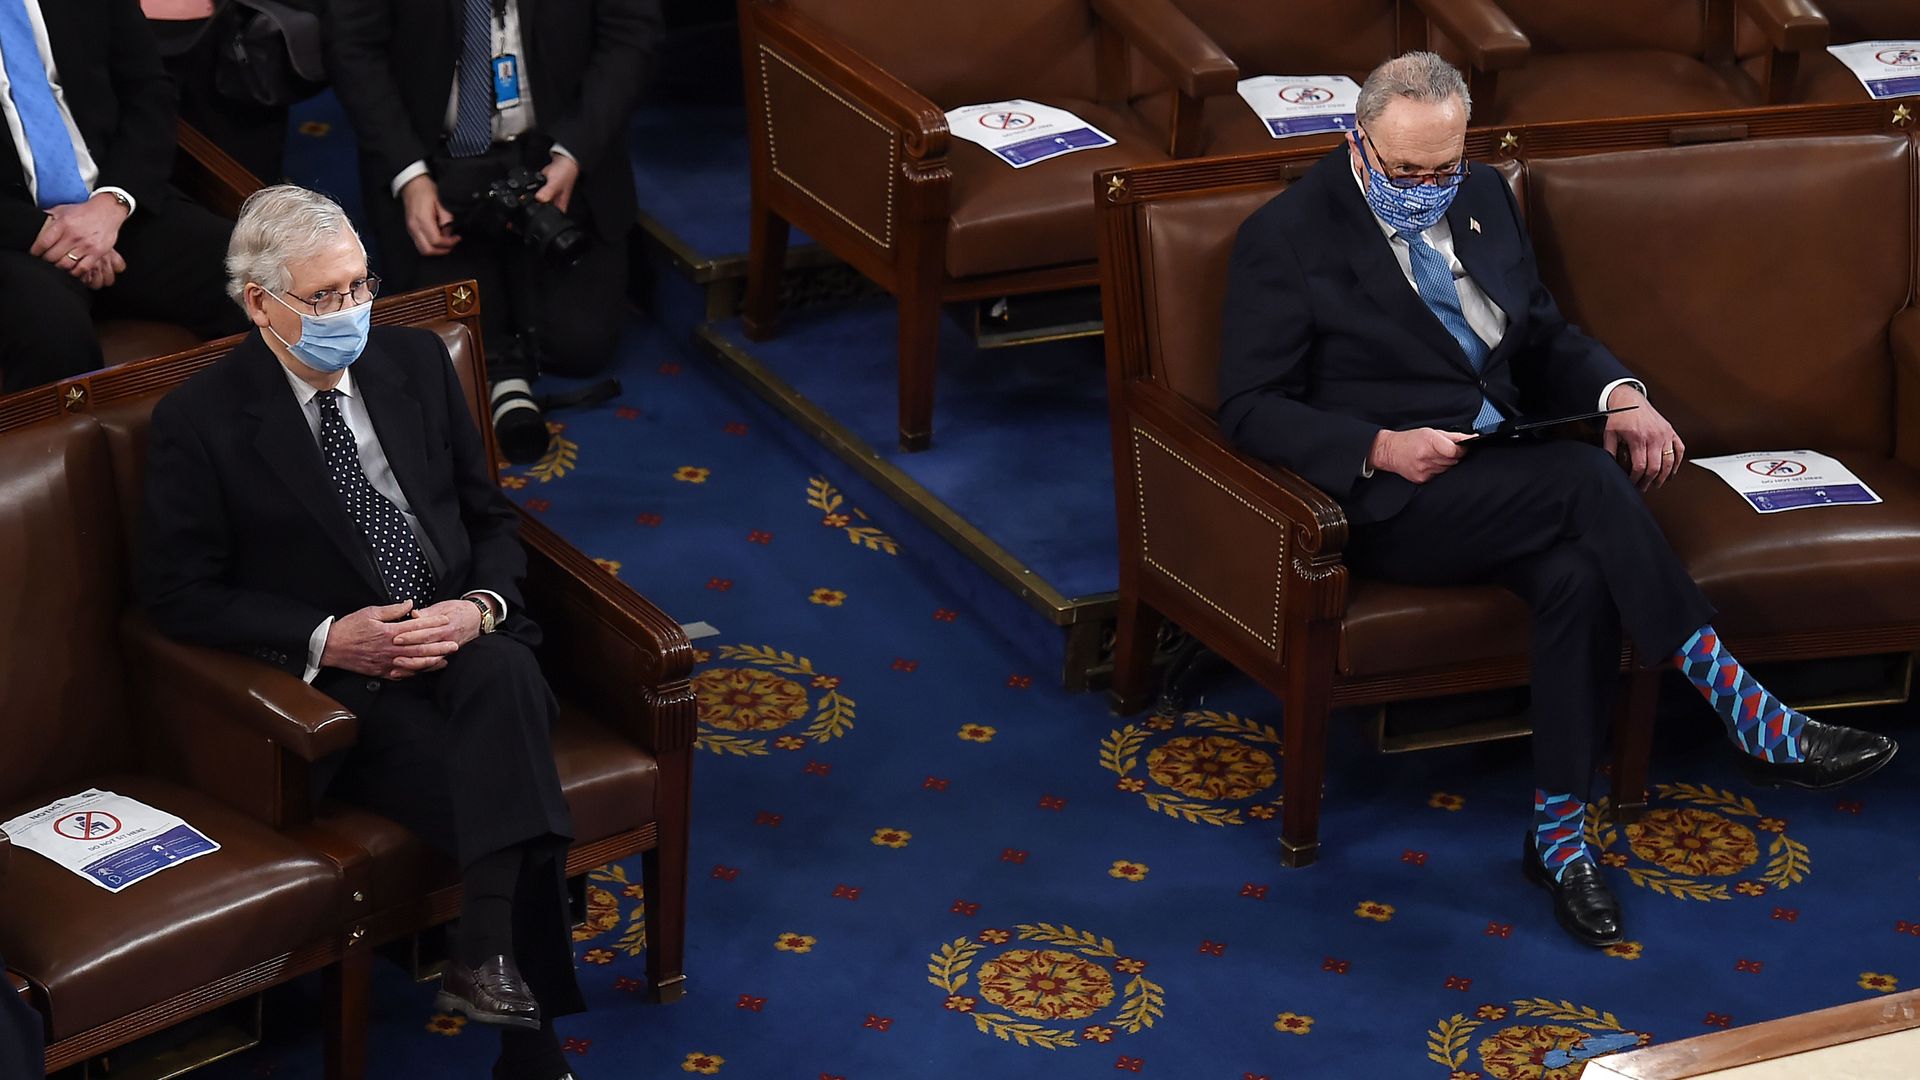 Picture of Mitch McConnell and Chuck Schumer in Senate chamber